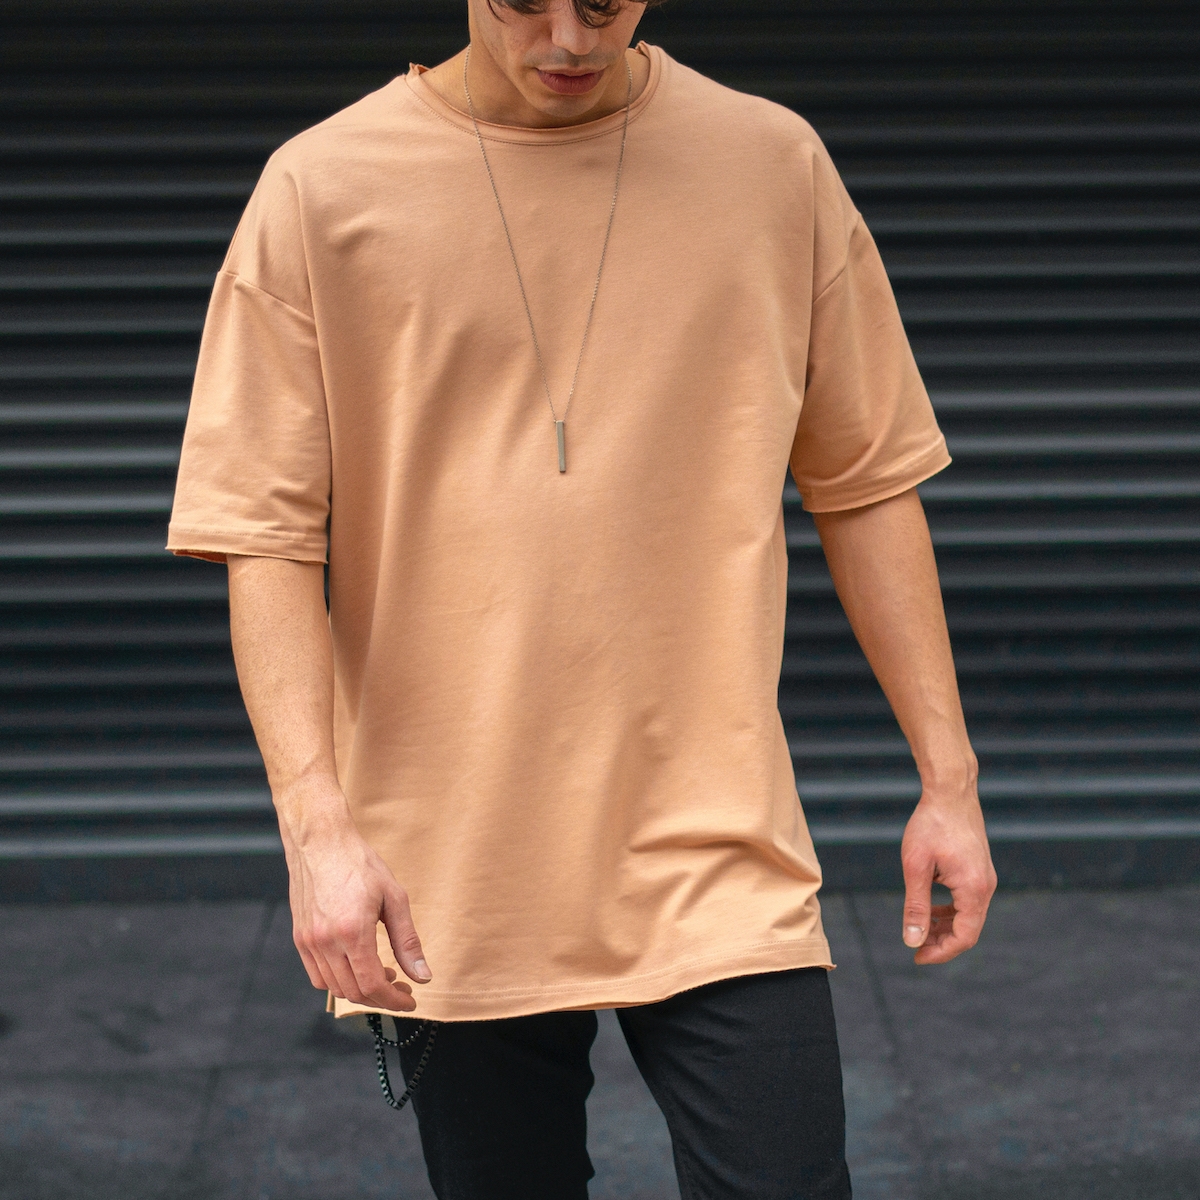 Oversized T Shirts Mens Outfit - Galuh Karnia458